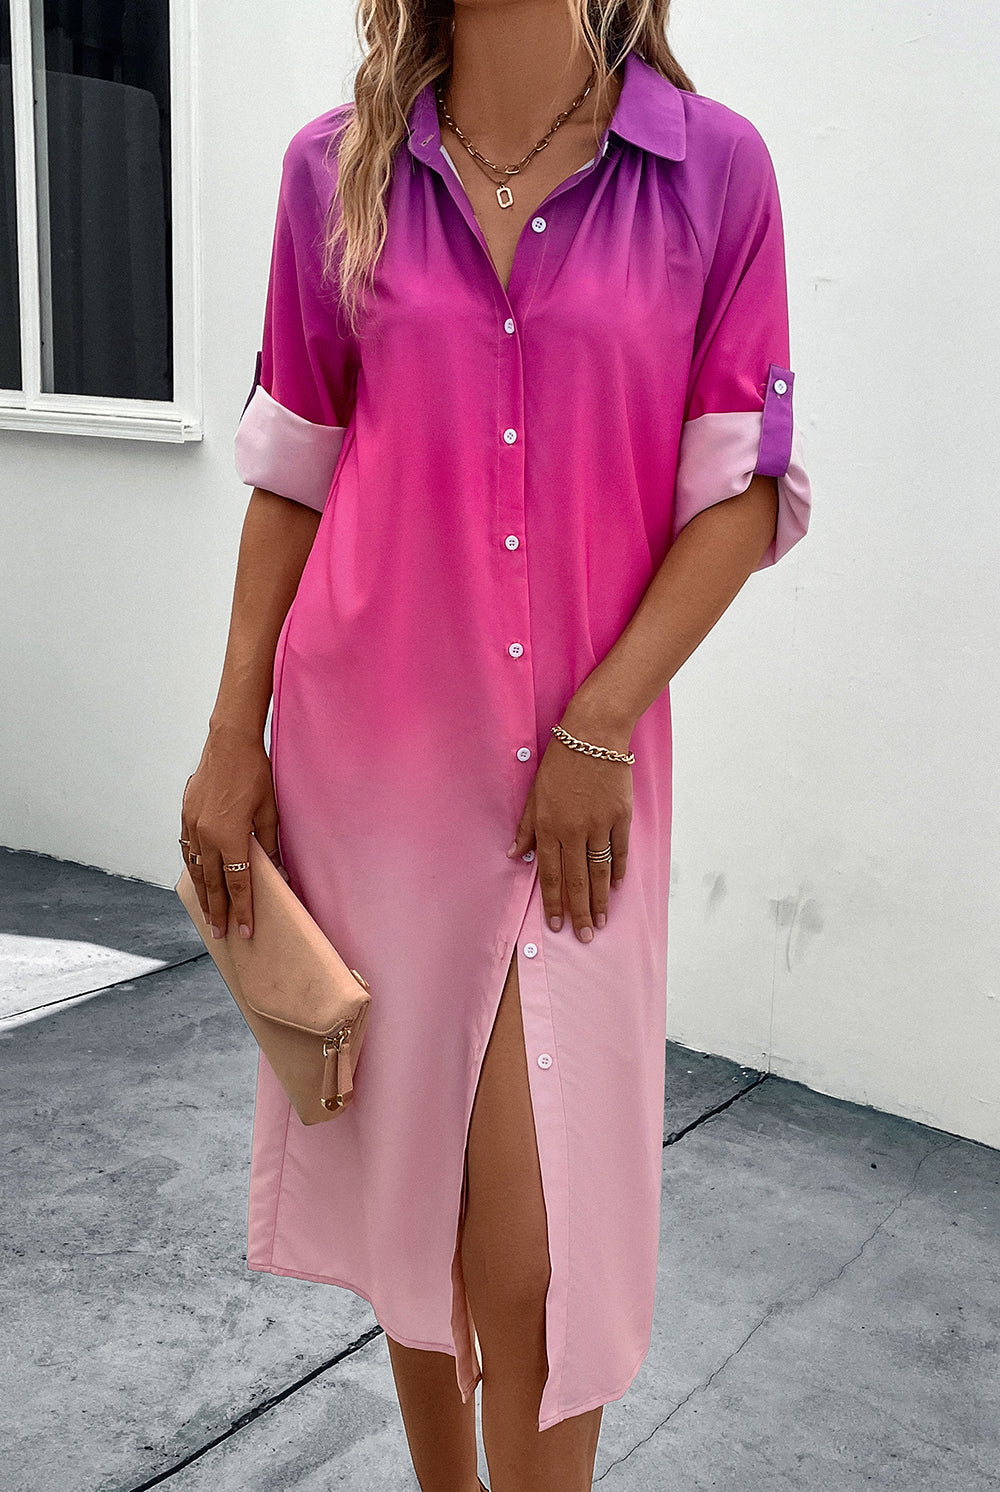 Gray Playing The Game Purple To Pink Gradient Long Sleeve Shirt Dress Midi Dresses